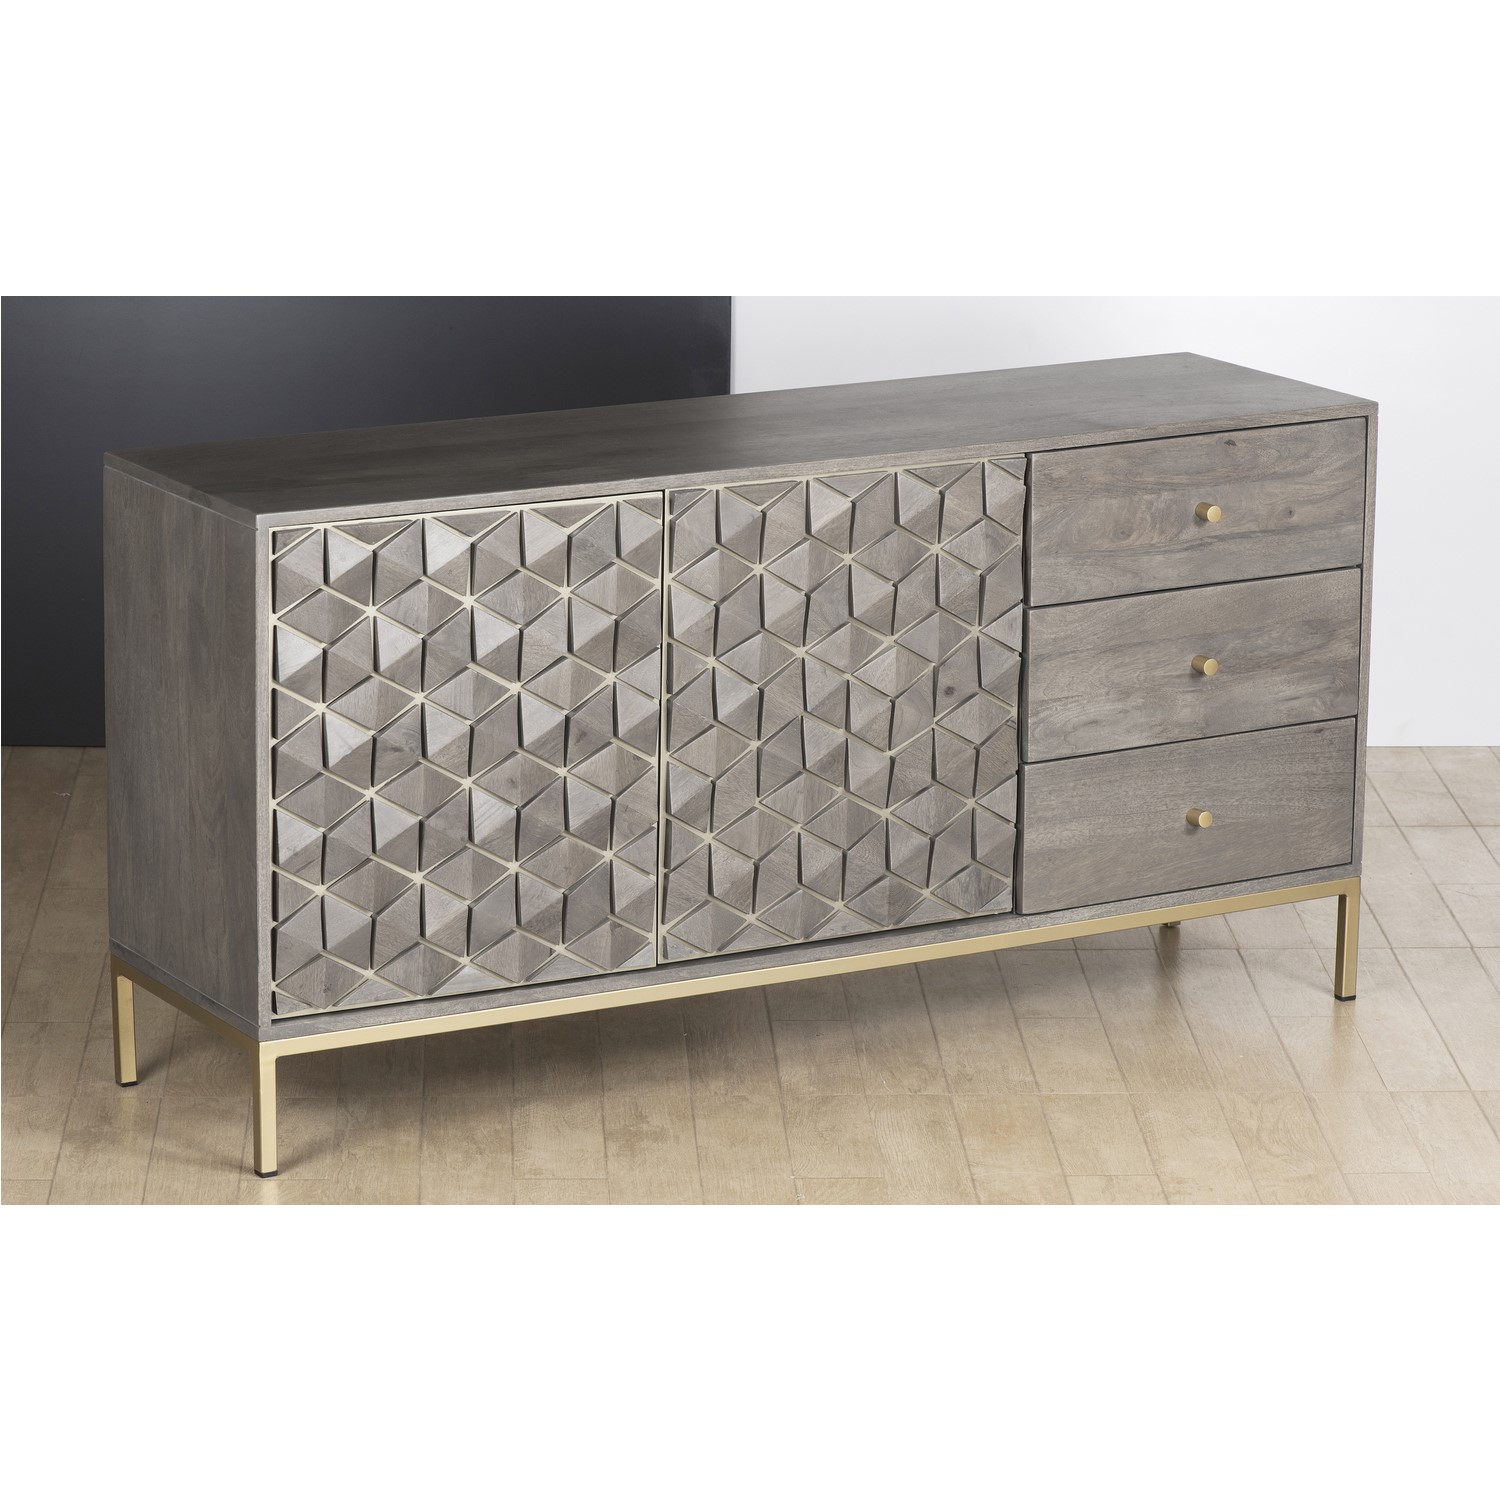 Photo of Large sideboard in grey wash with gold legs and drawers - alice